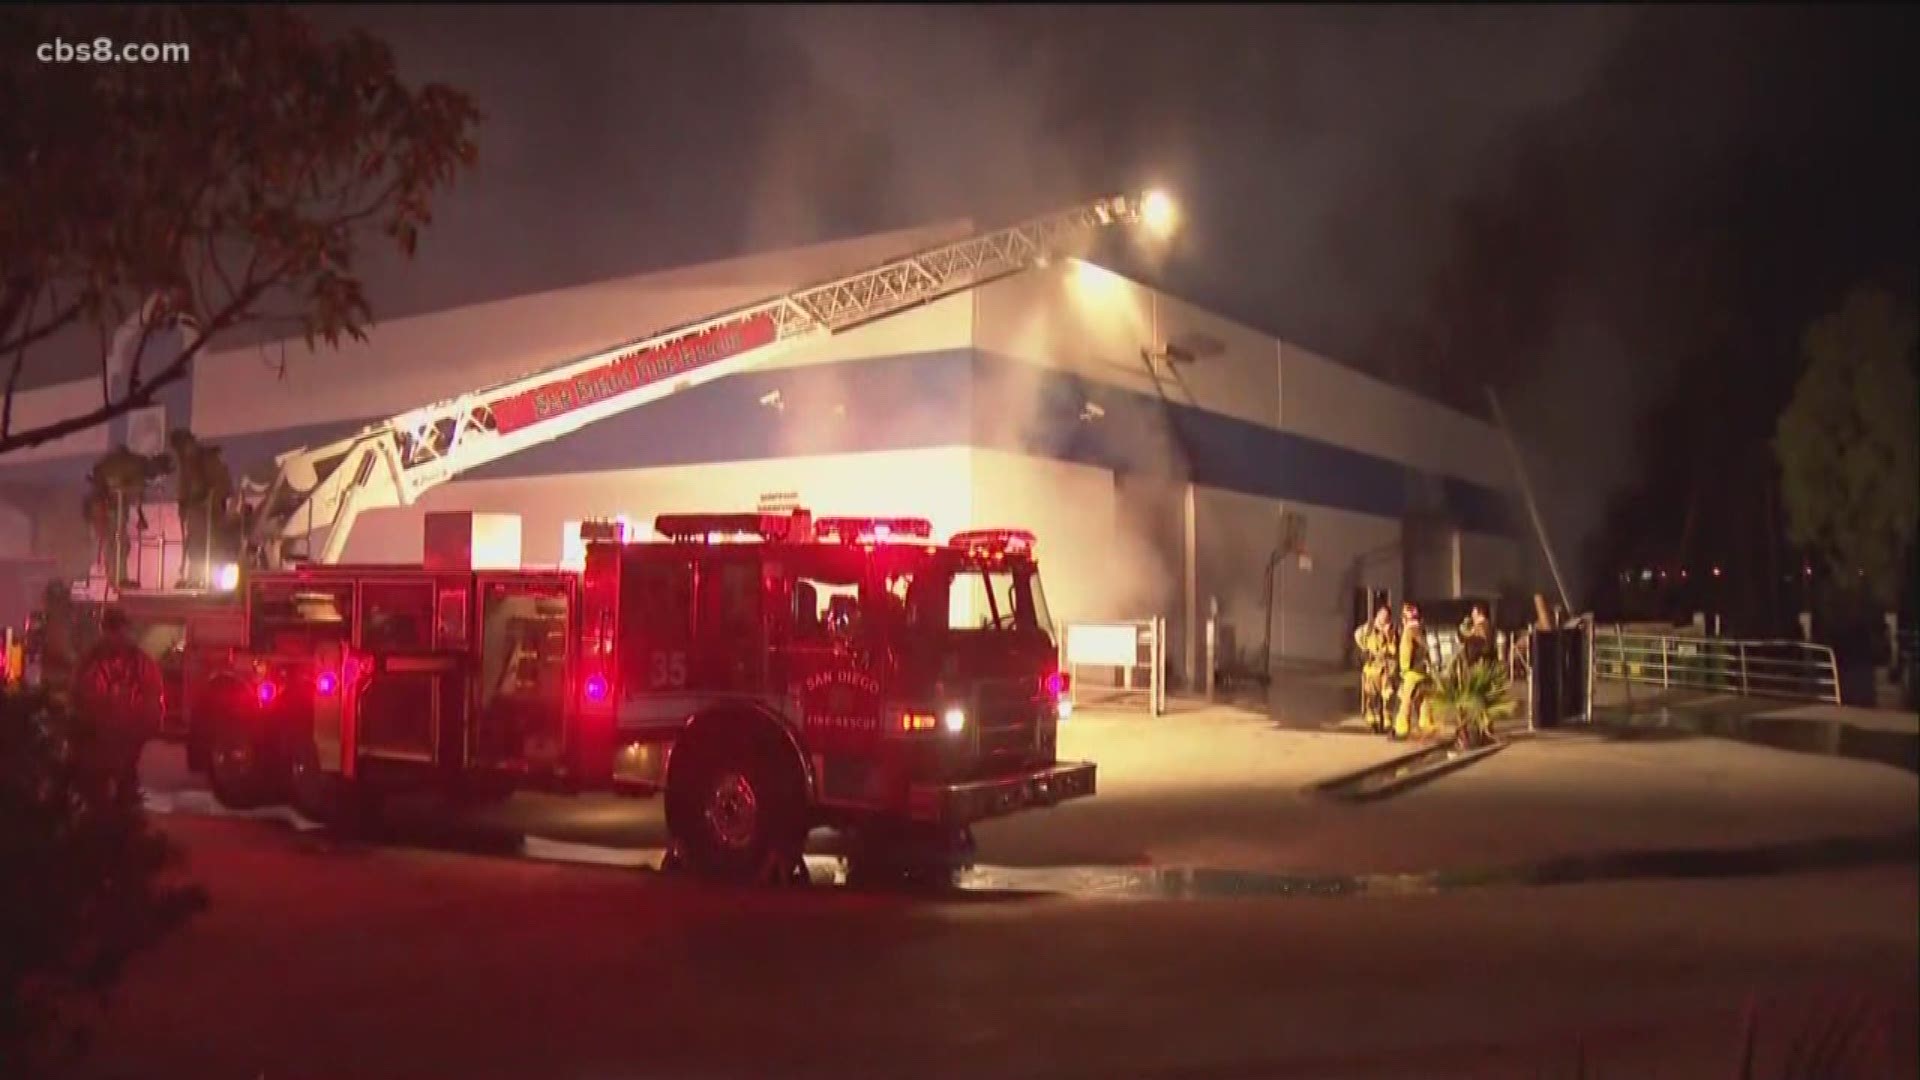 When crews arrived on scene, heavy smoke filled the warehouse making it difficult for crews to find the source of the fire, SDFD Deputy Chief Steve Wright said.